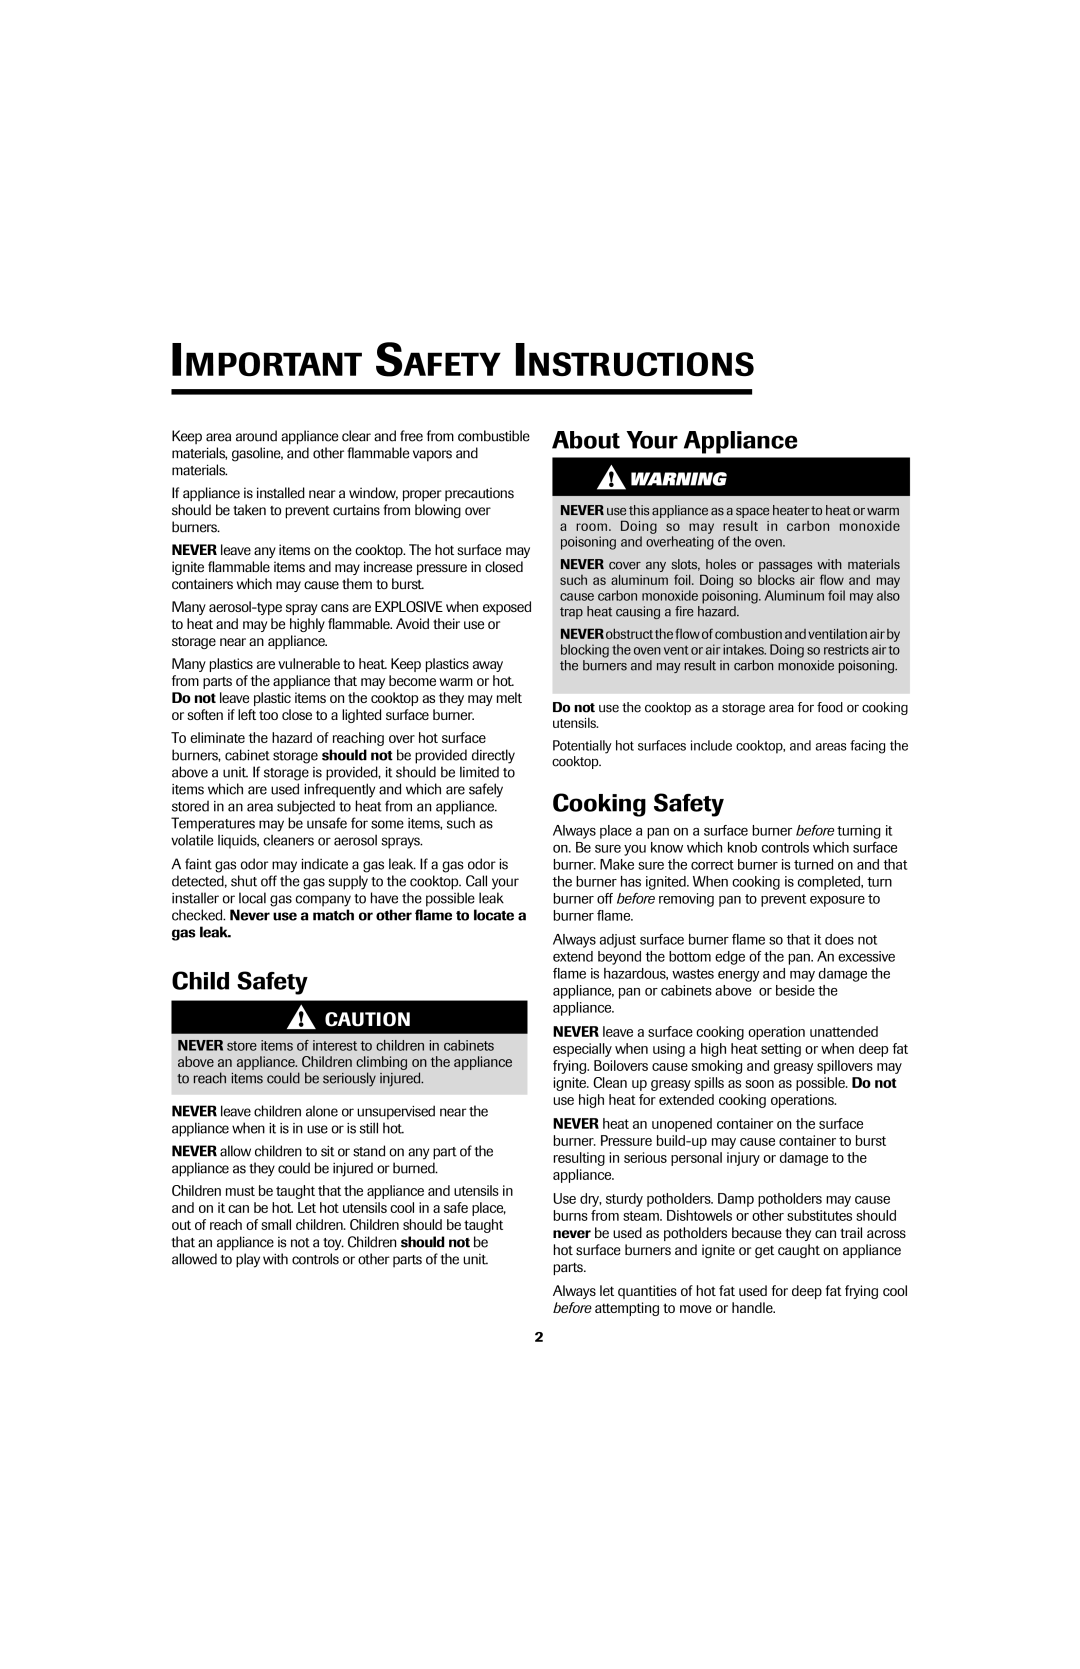 Maytag 8111P536-60 Important Safety Instructions, About Your Appliance, Child Safety, Cooking Safety 